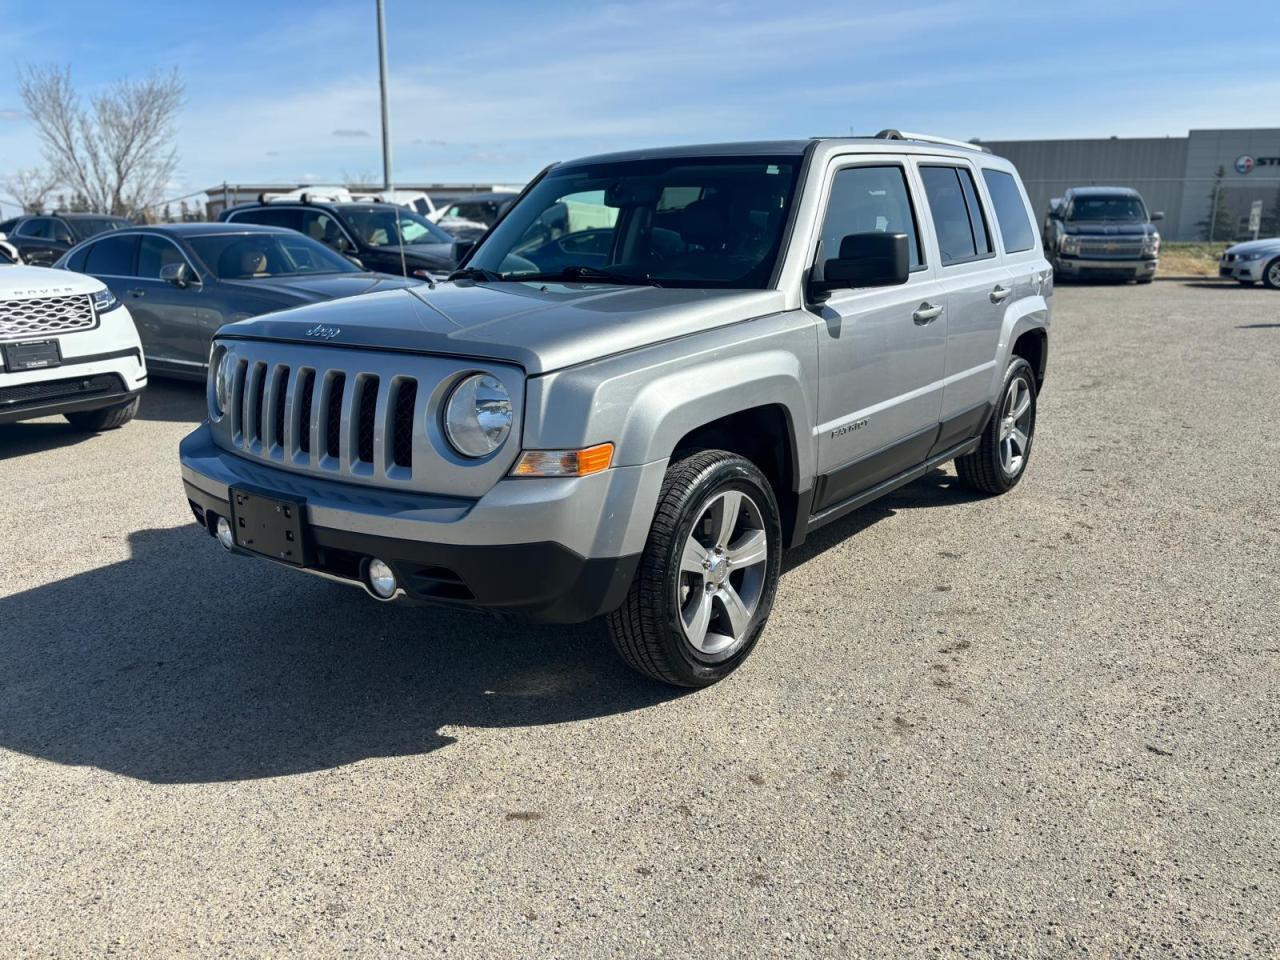 2016 Jeep Patriot HIGH ALTITUDE | LEATHER | SUNROOF | $0 DOWN